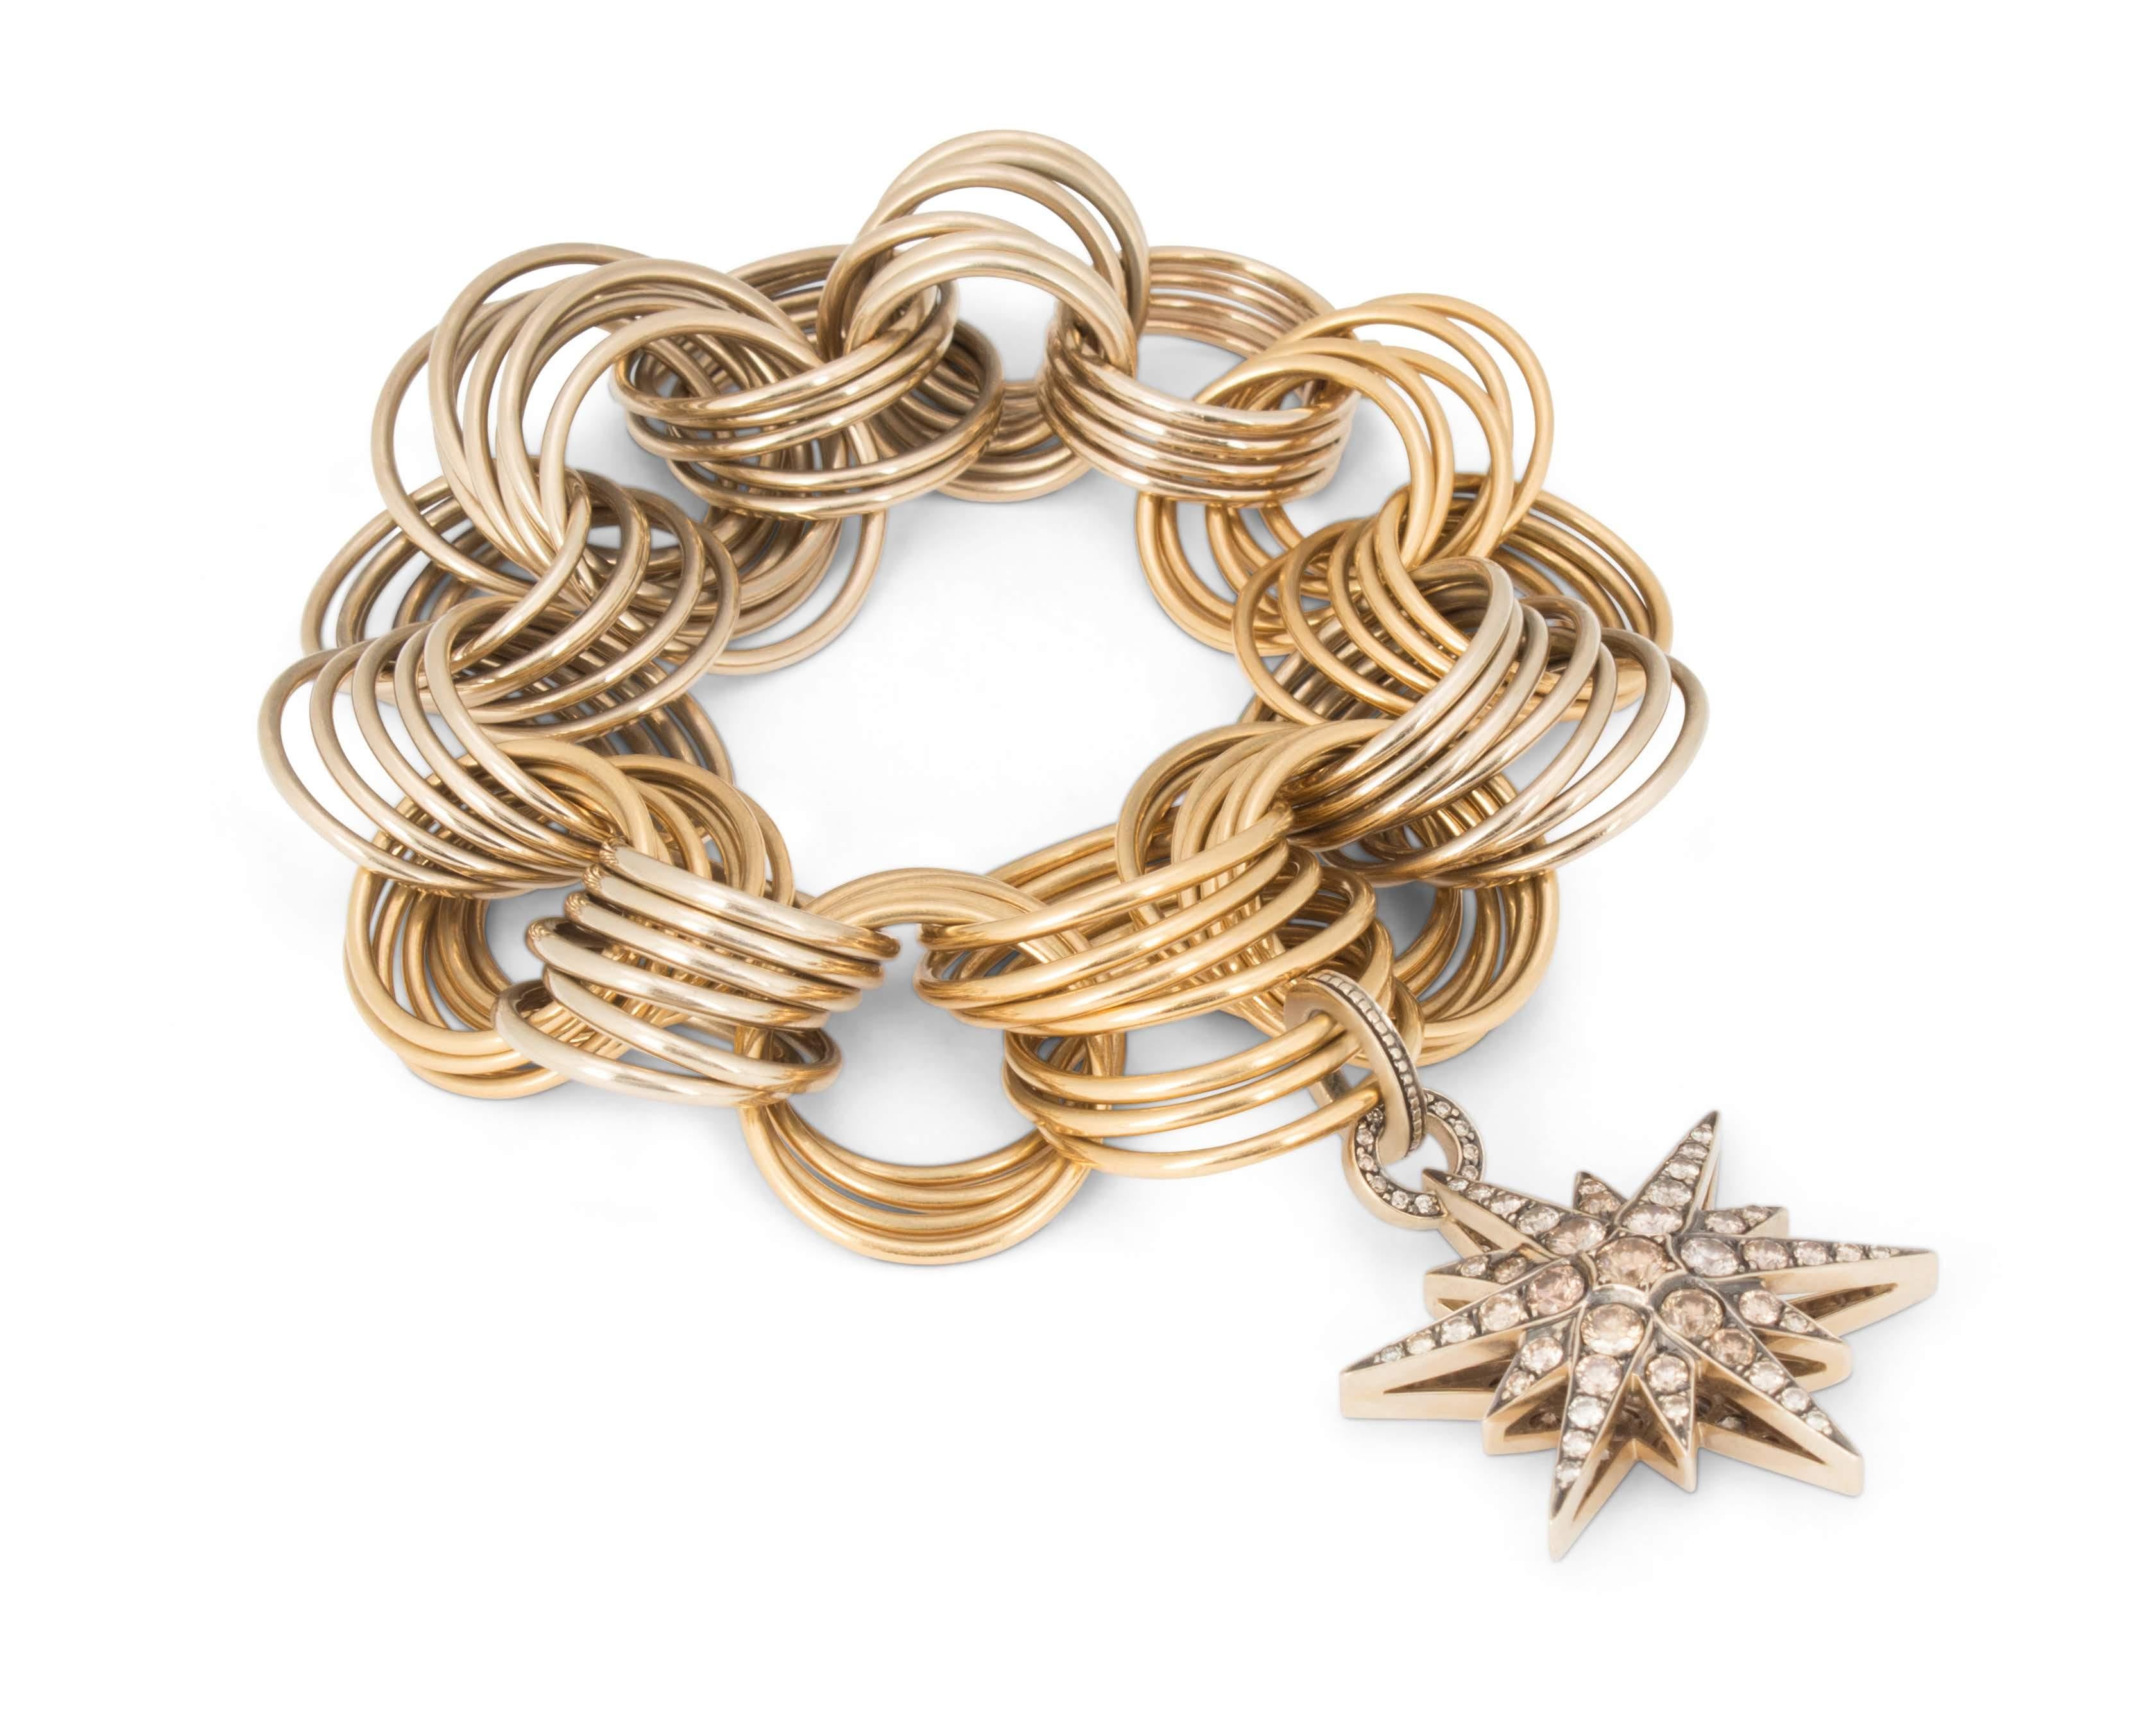 Authentic H. Stern bracelet comprised of a series of interlocking rings crafted in two-tone 18 karat gold. H. Stern's 'Star Collection' charm completes the bracelet. The charm is crafted in 18 karat blackened gold and set with an estimated 5.00